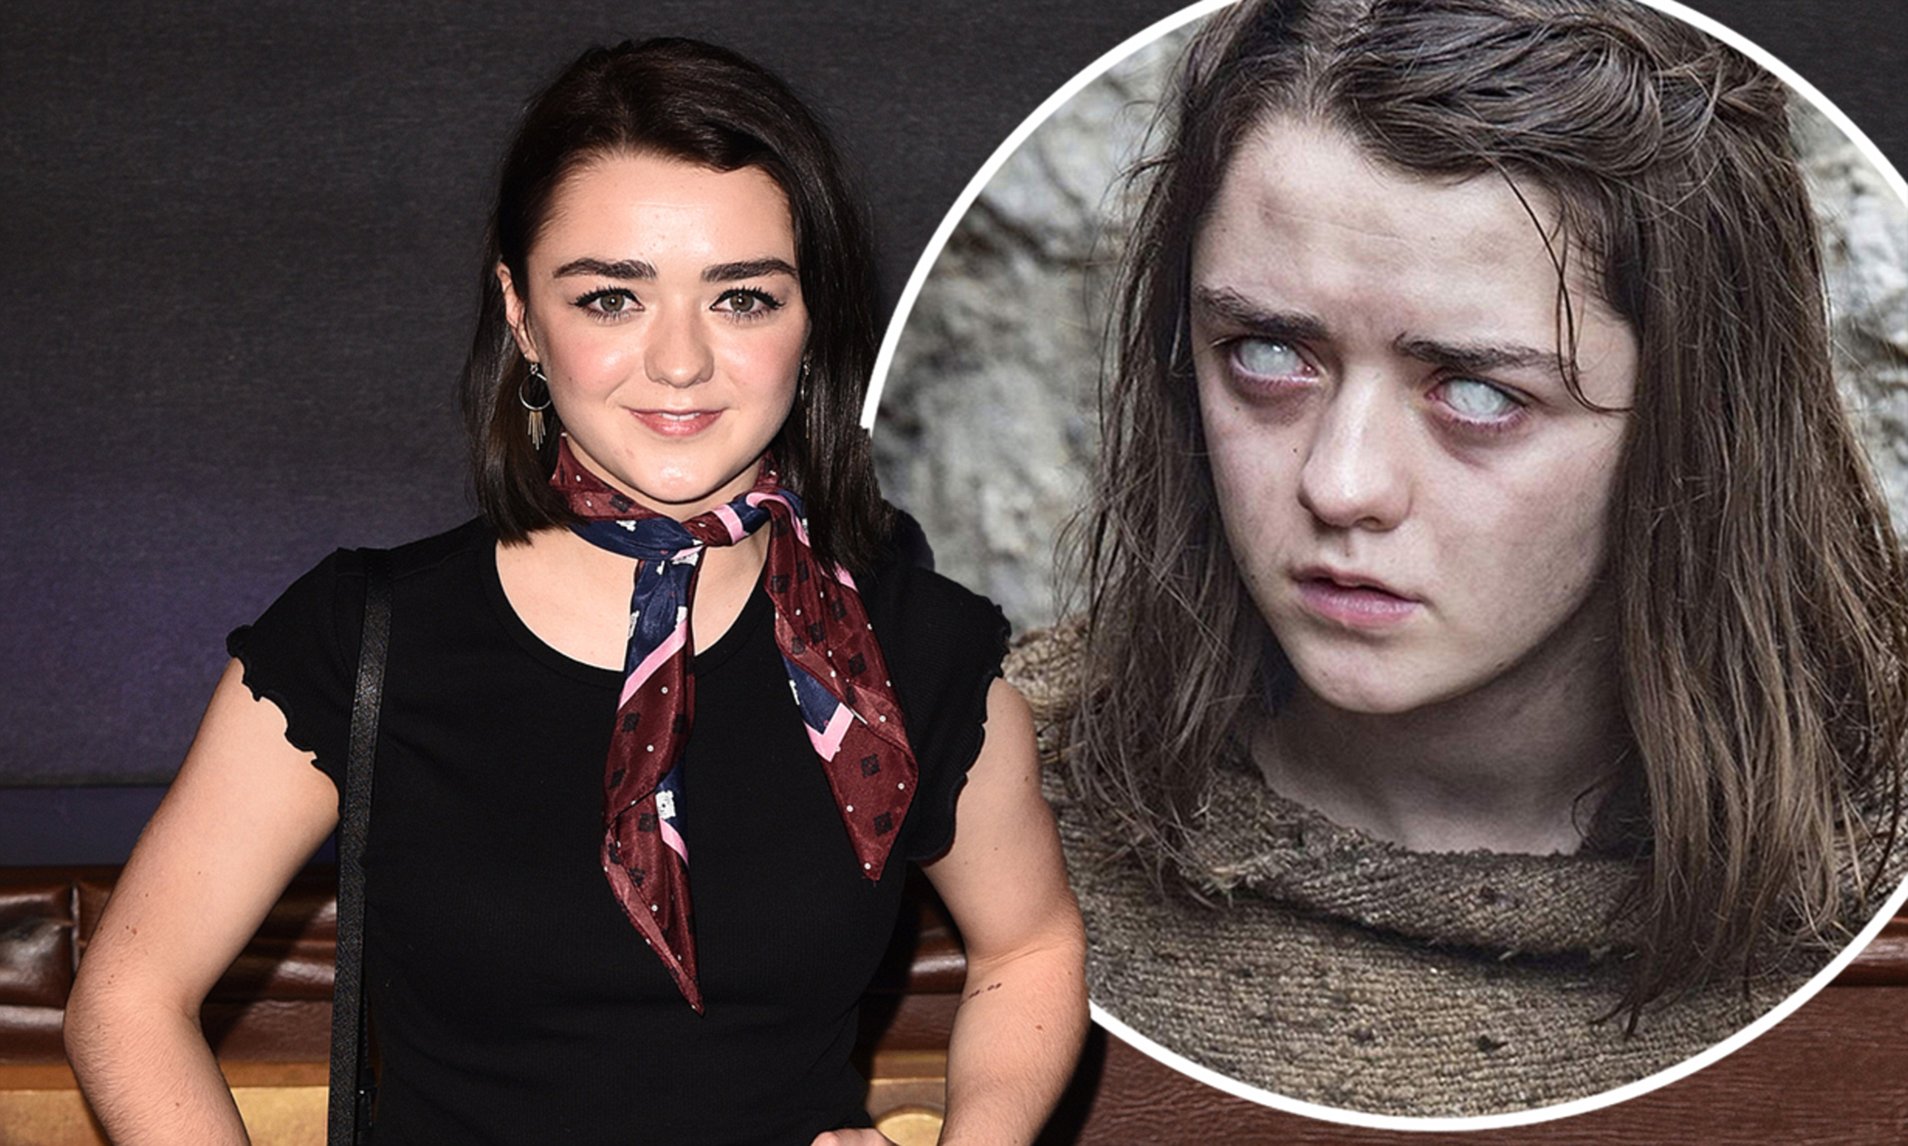 alfred tremblay recommends maisie williams photo leak pic